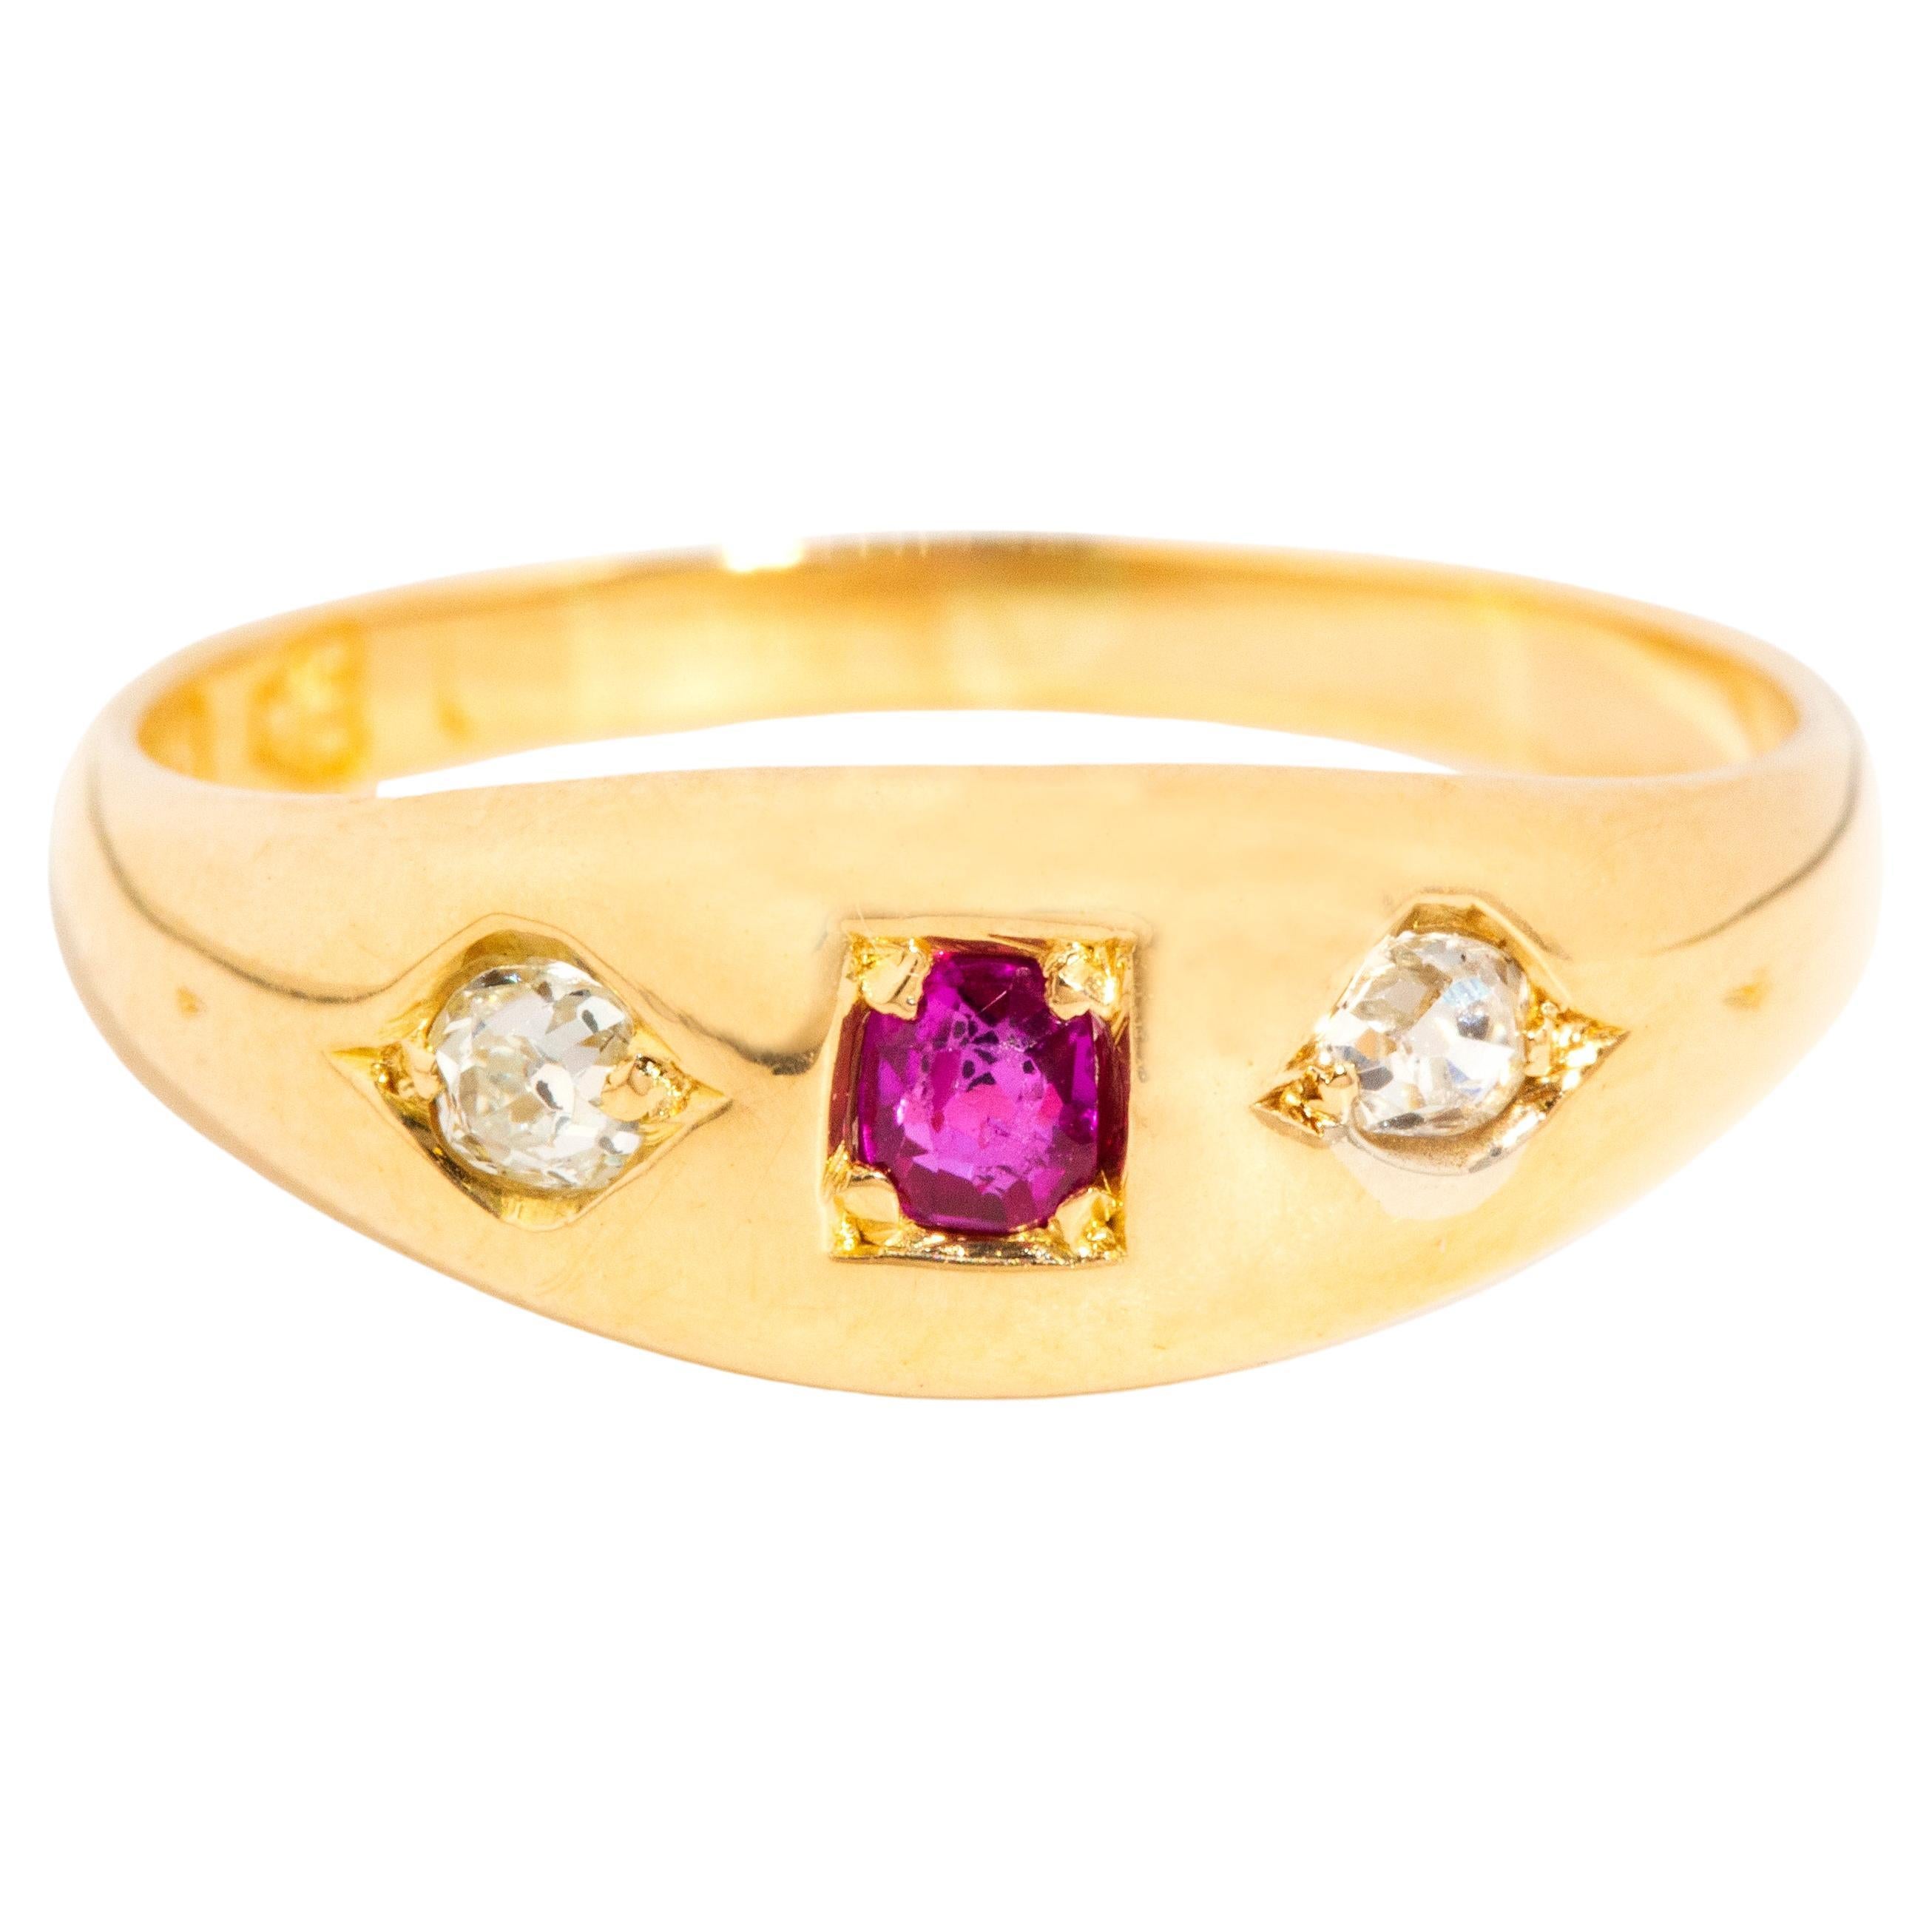 Antique Victorian Era Bright Red Pink Ruby & Old Cut Diamond Ring 18 Carat Gold For Sale